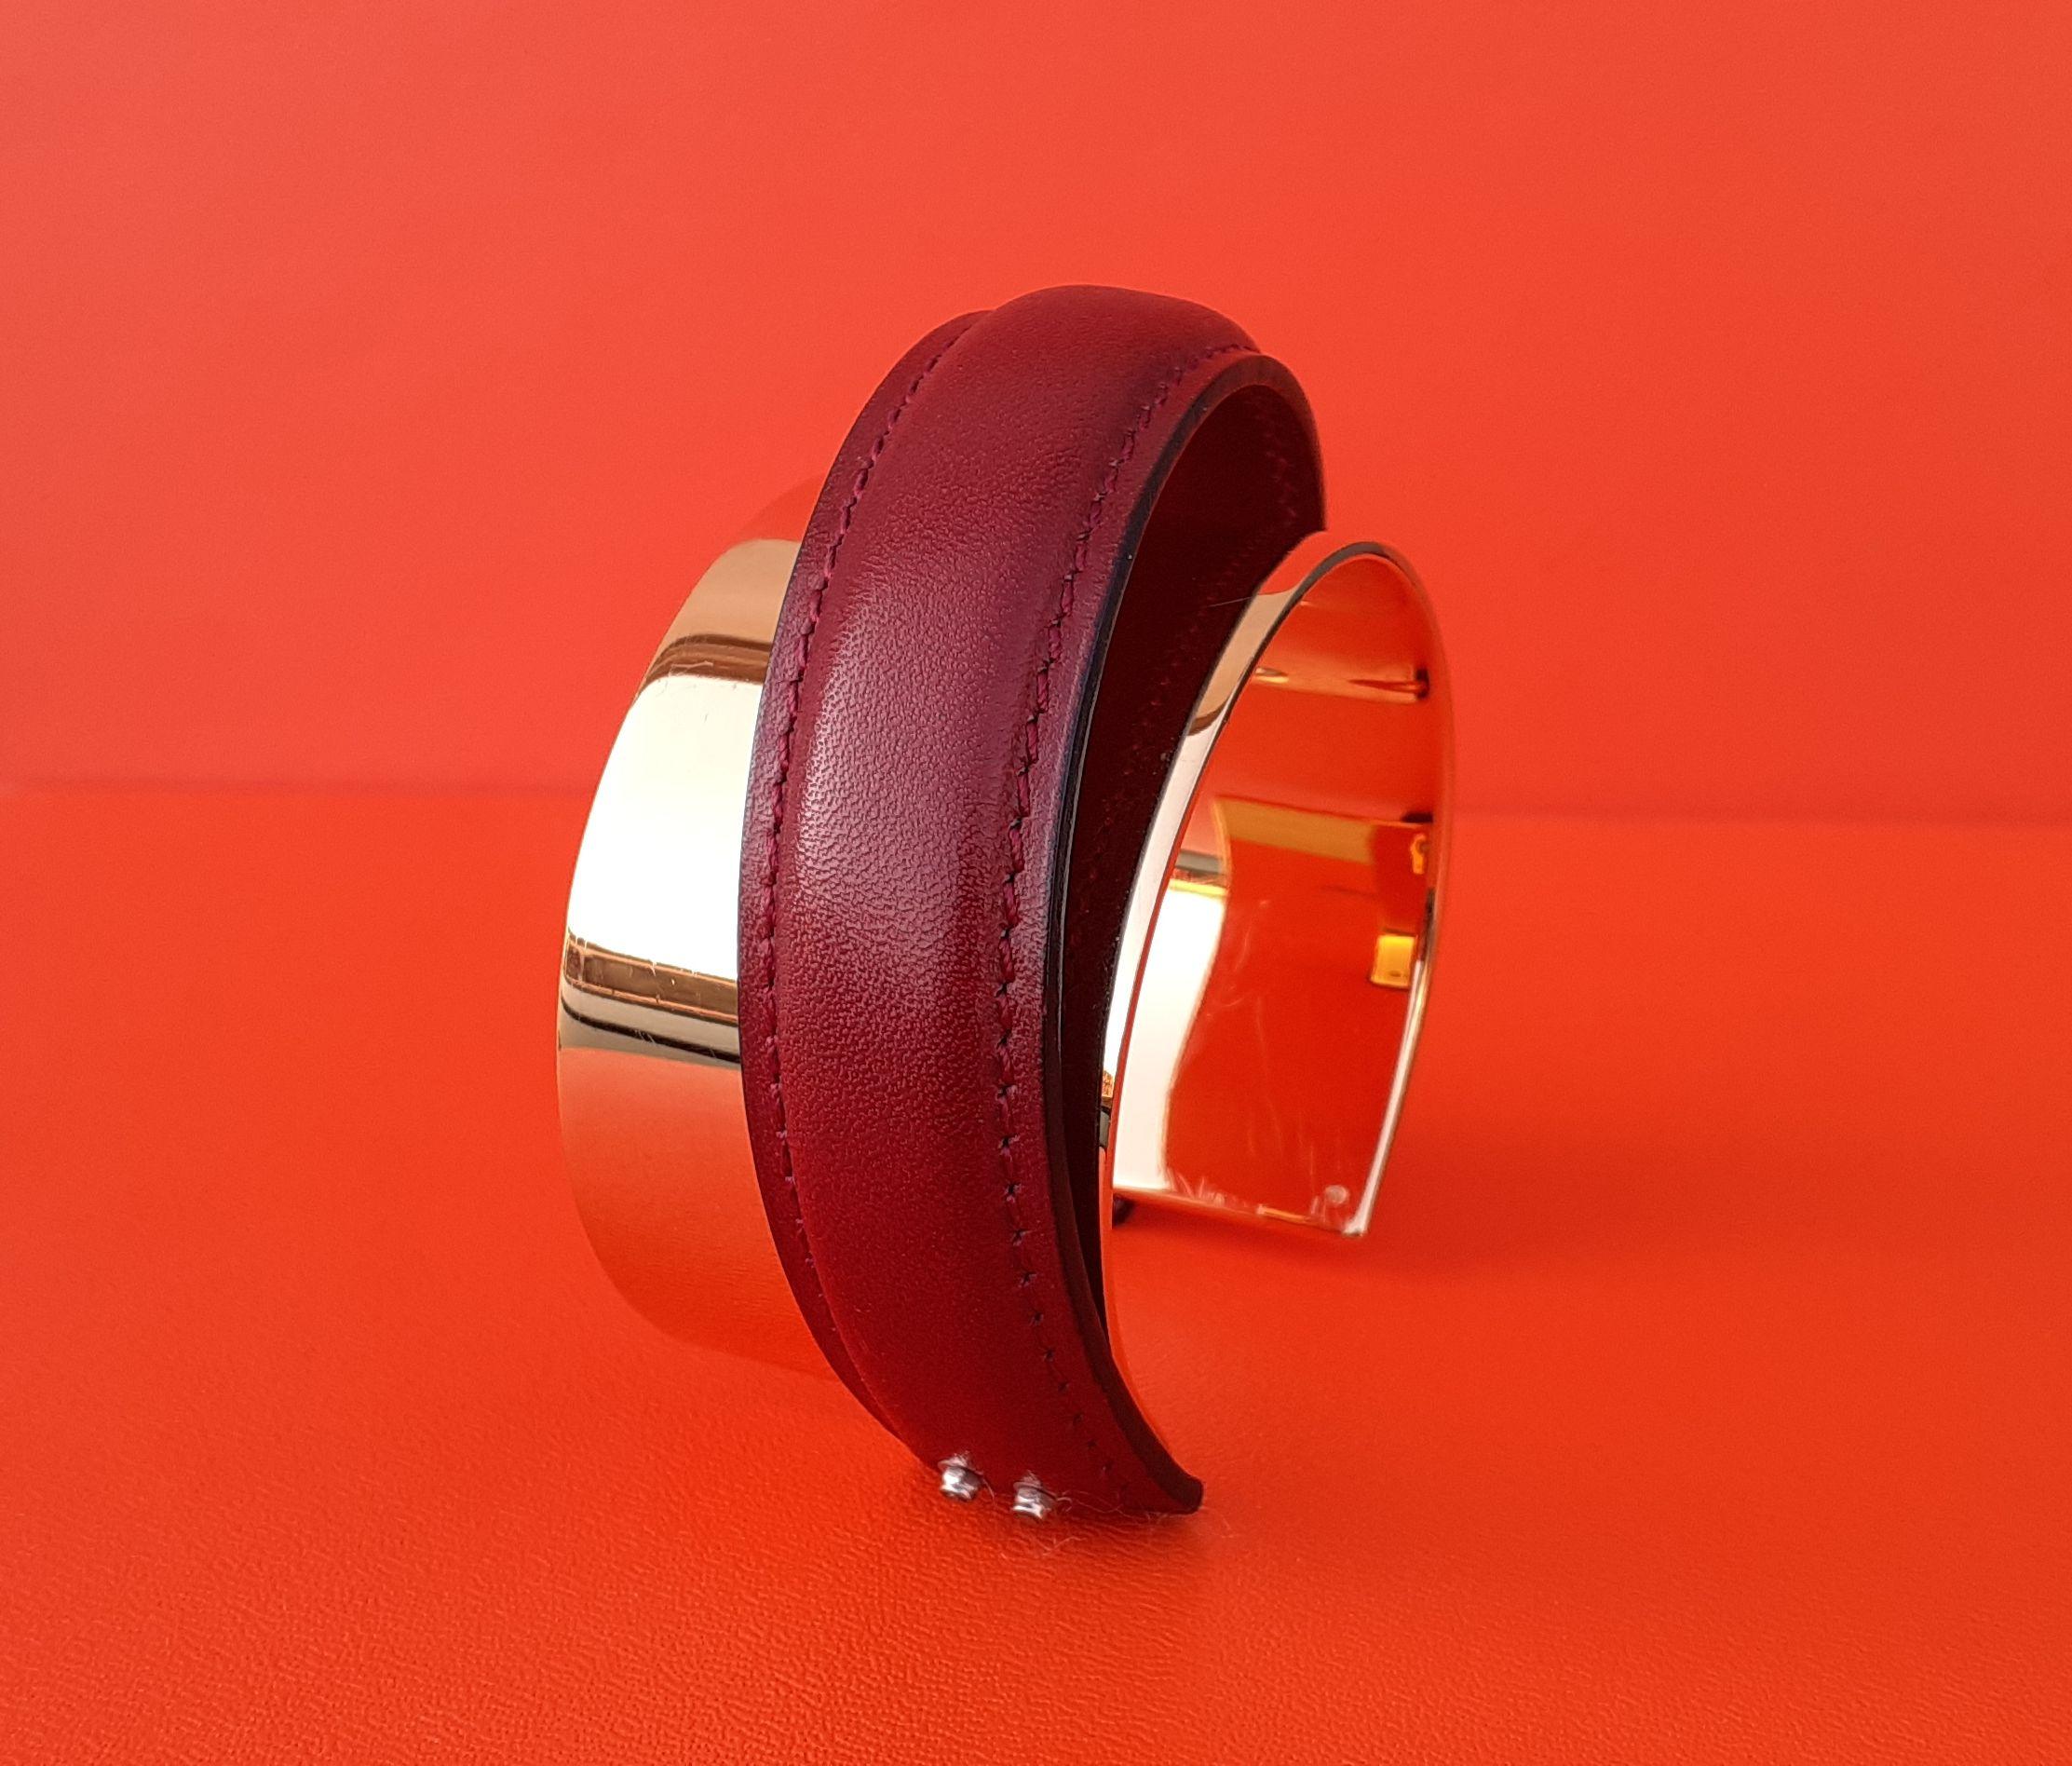 Super Rare and Absolutely Gorgeous Authentic Hermès Bracelet

Composed of a cuff in gilded metal, enhanced in relief with a rigid strip of smooth red leather, connecting the 2 ends of the metal diagonally

There is a hallmark, but can not say if the